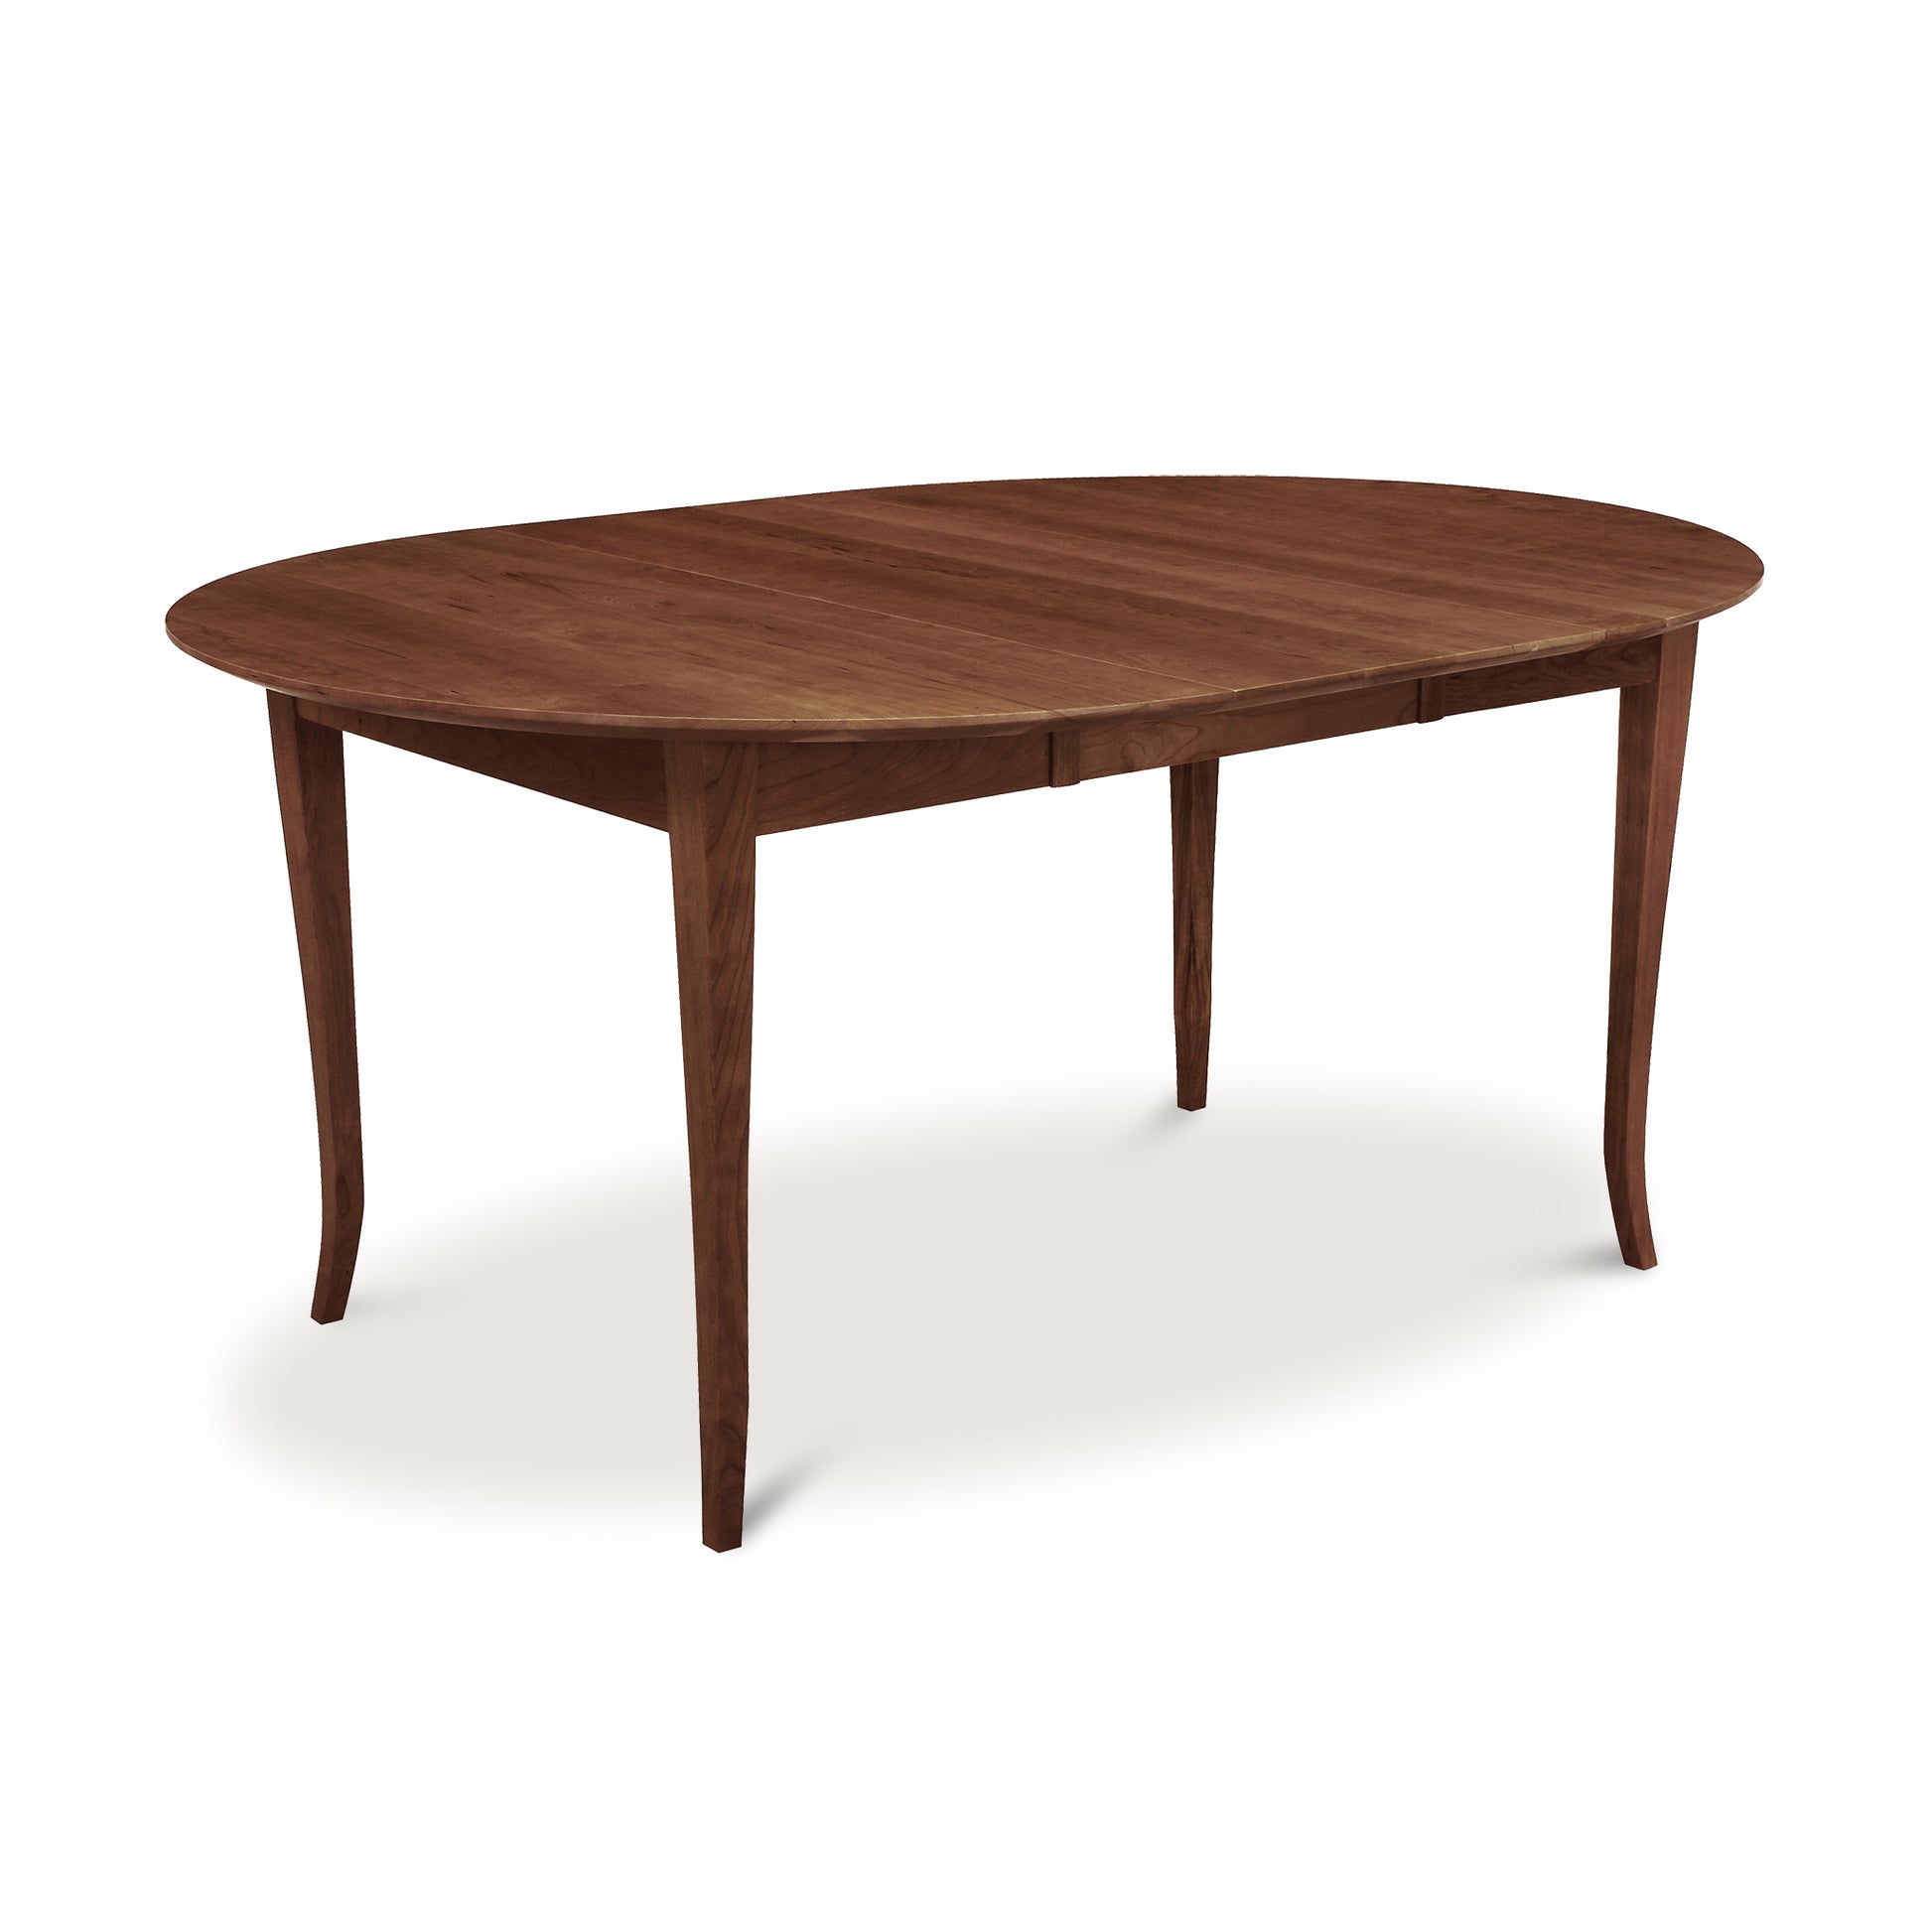 A sustainable Lyndon Furniture Classic Shaker Flare Leg Round Extension Table with a wooden top, handmade in Vermont.